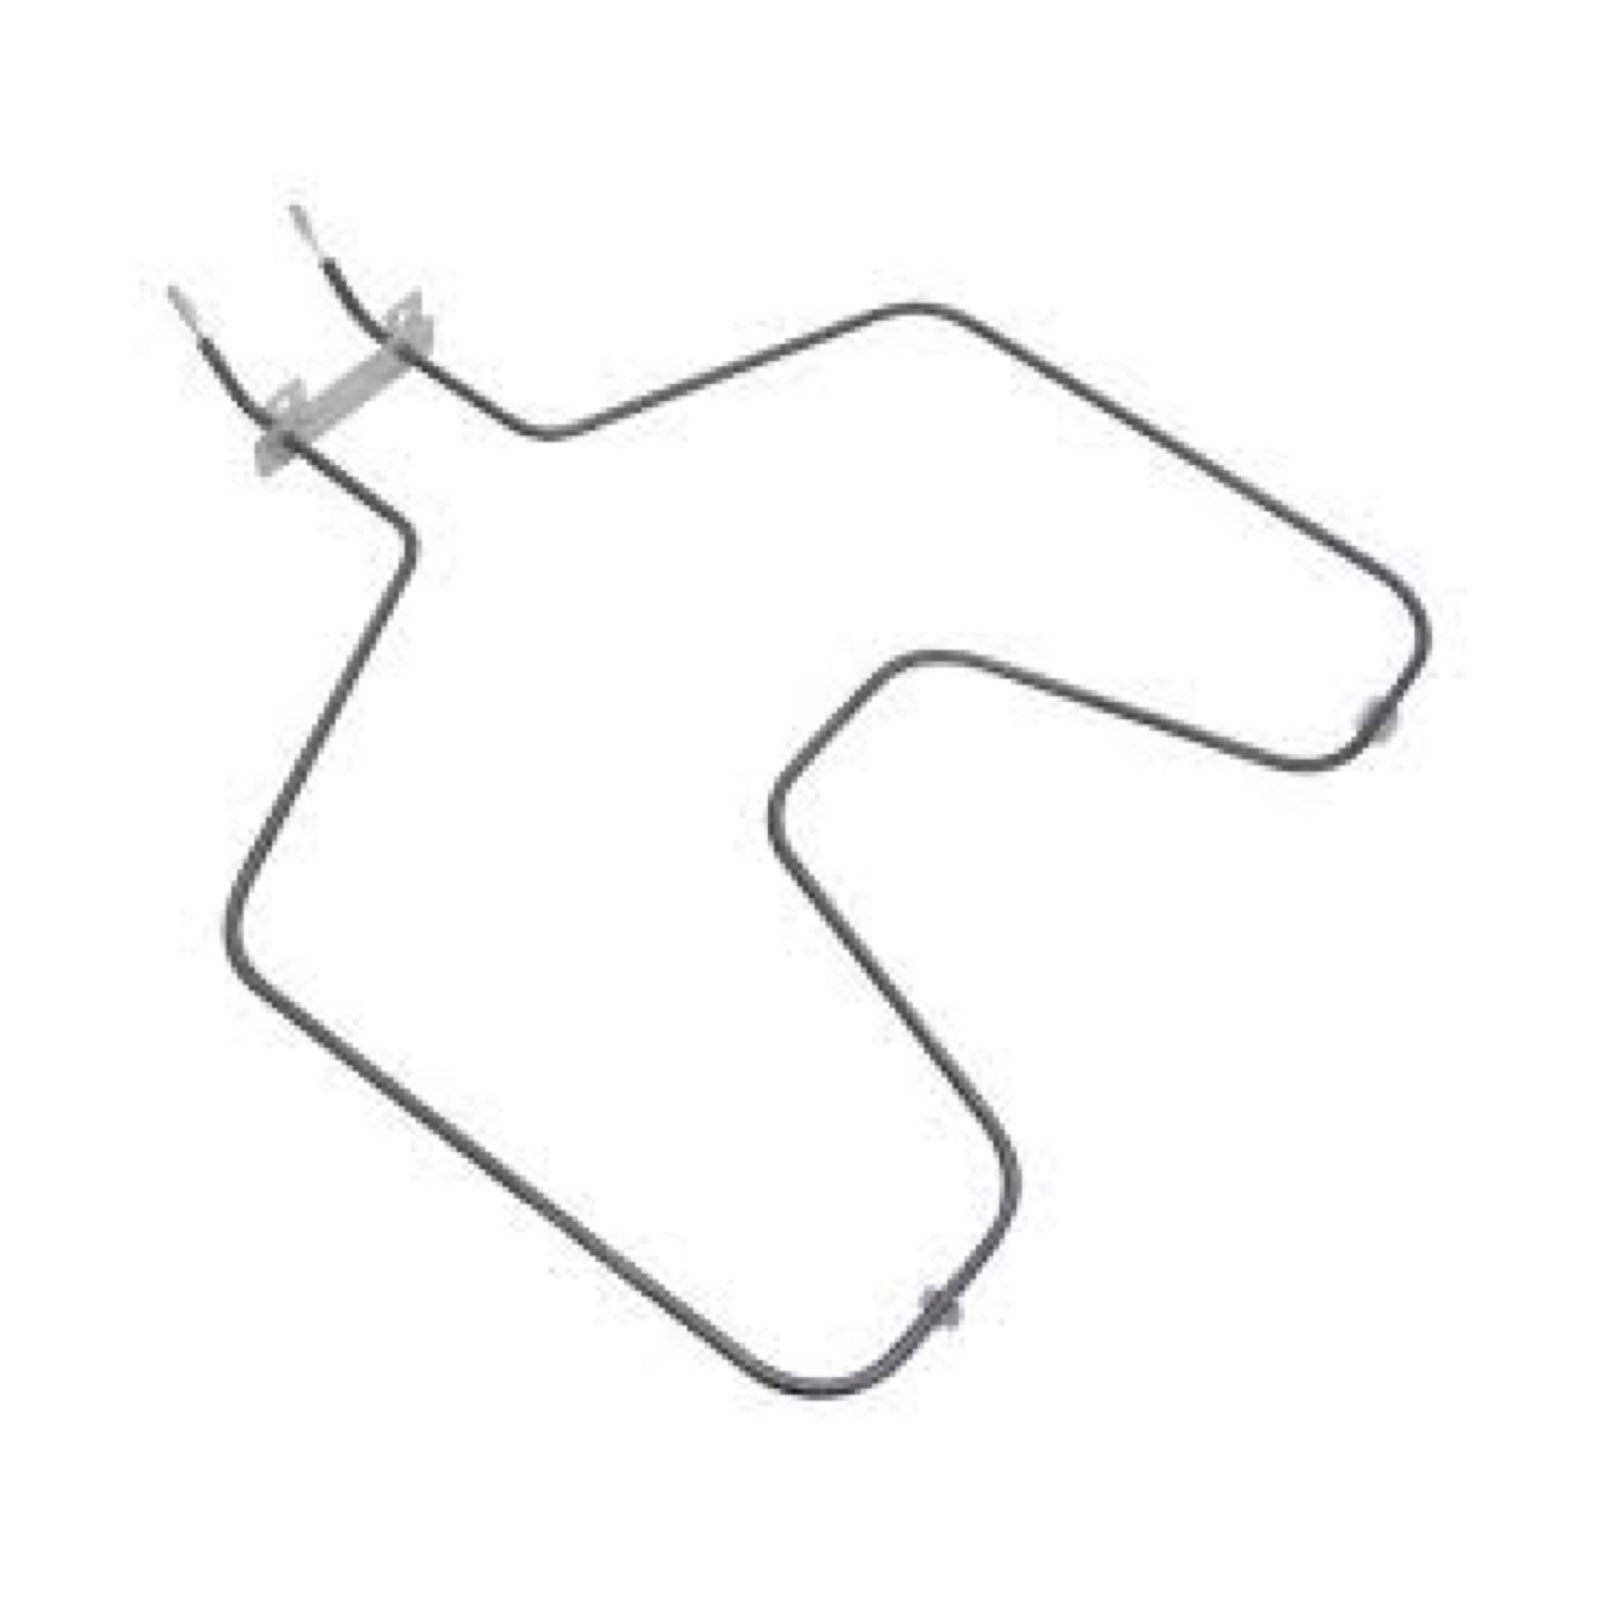 EDGEWATER PARTS WB44T10010 Bake Element for GE Oven